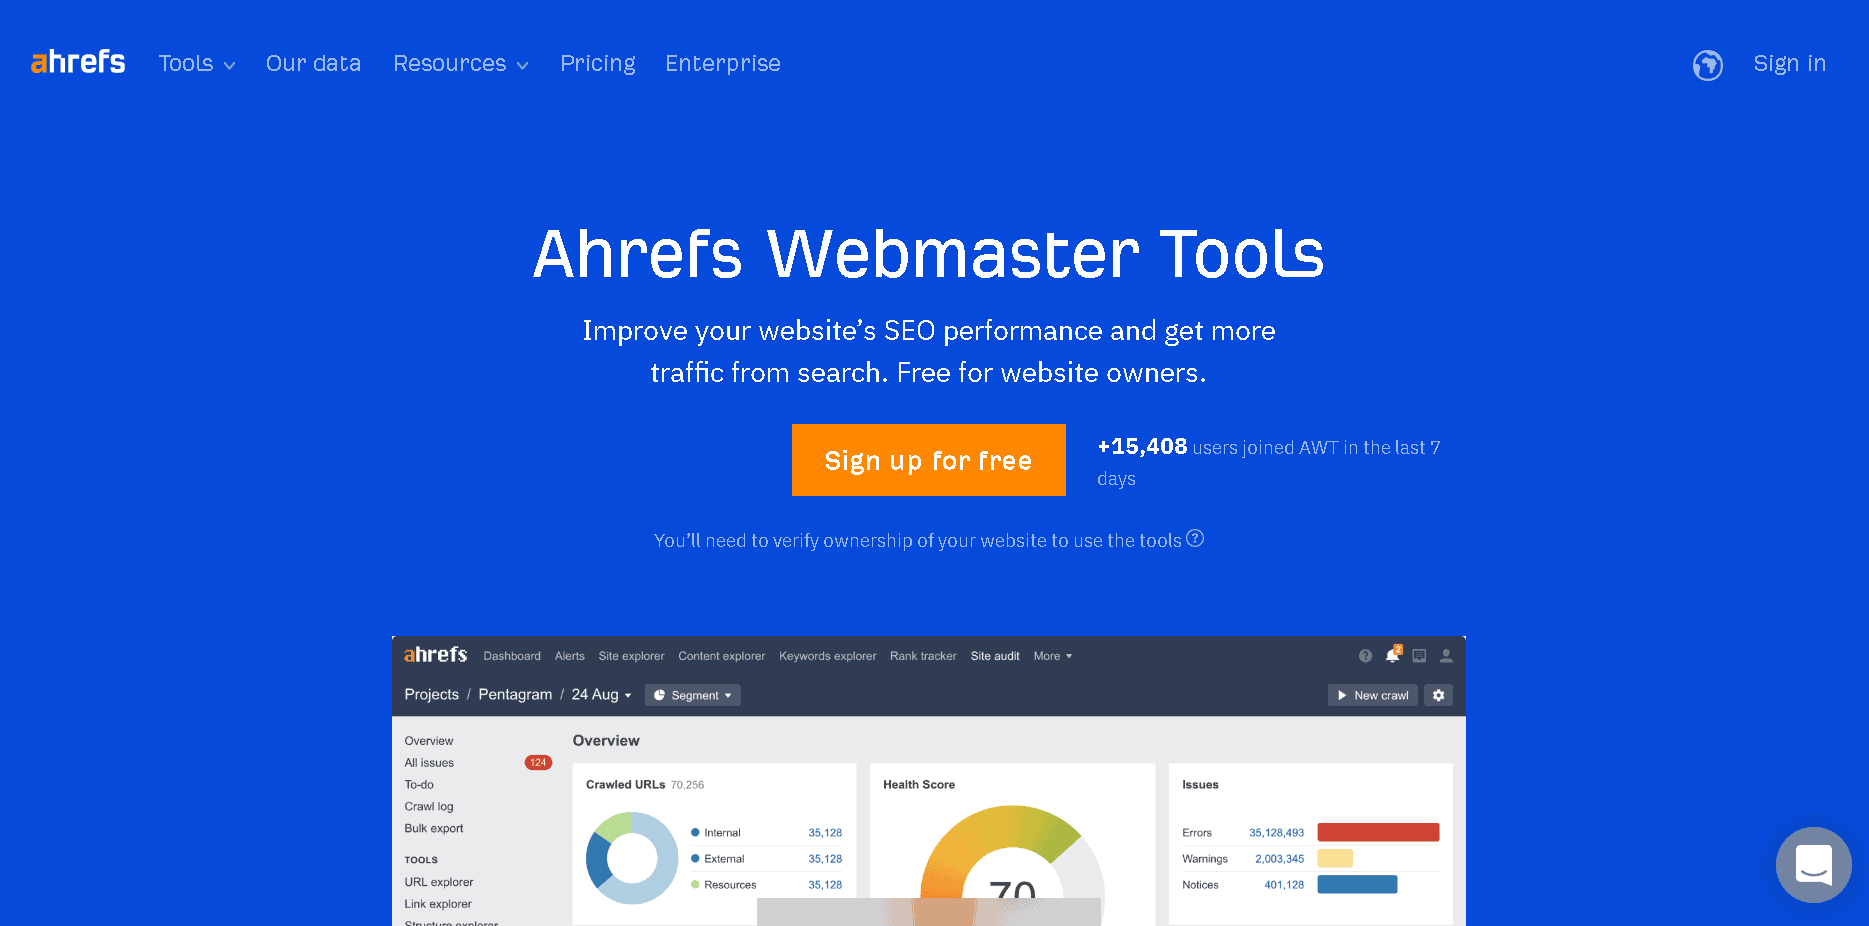 Ahrefs Webmaster Tools is free service by Ahrefs